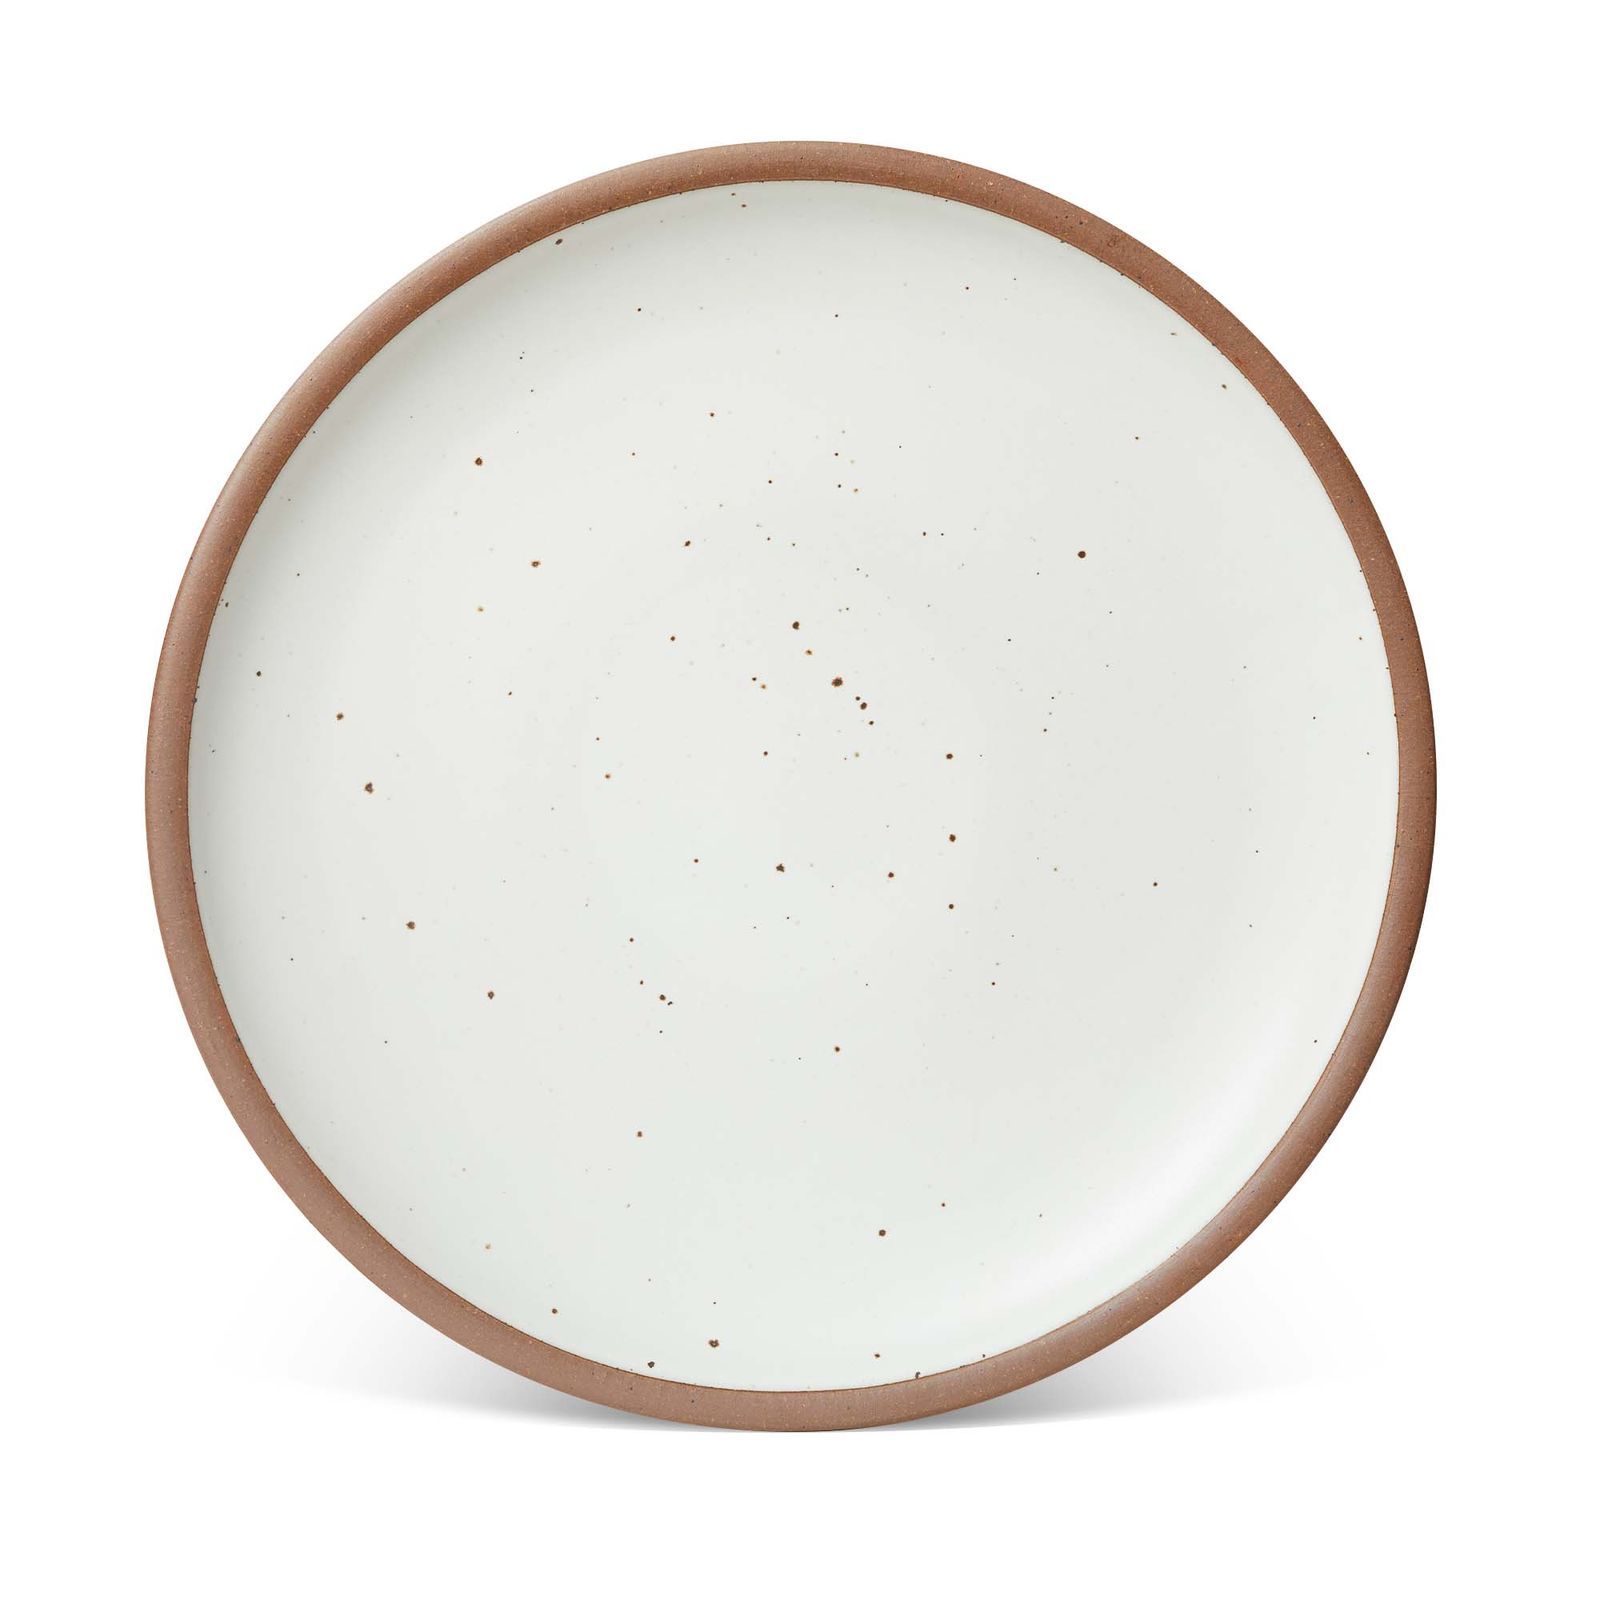 A large ceramic platter in a cool white color featuring iron speckles and an unglazed rim.